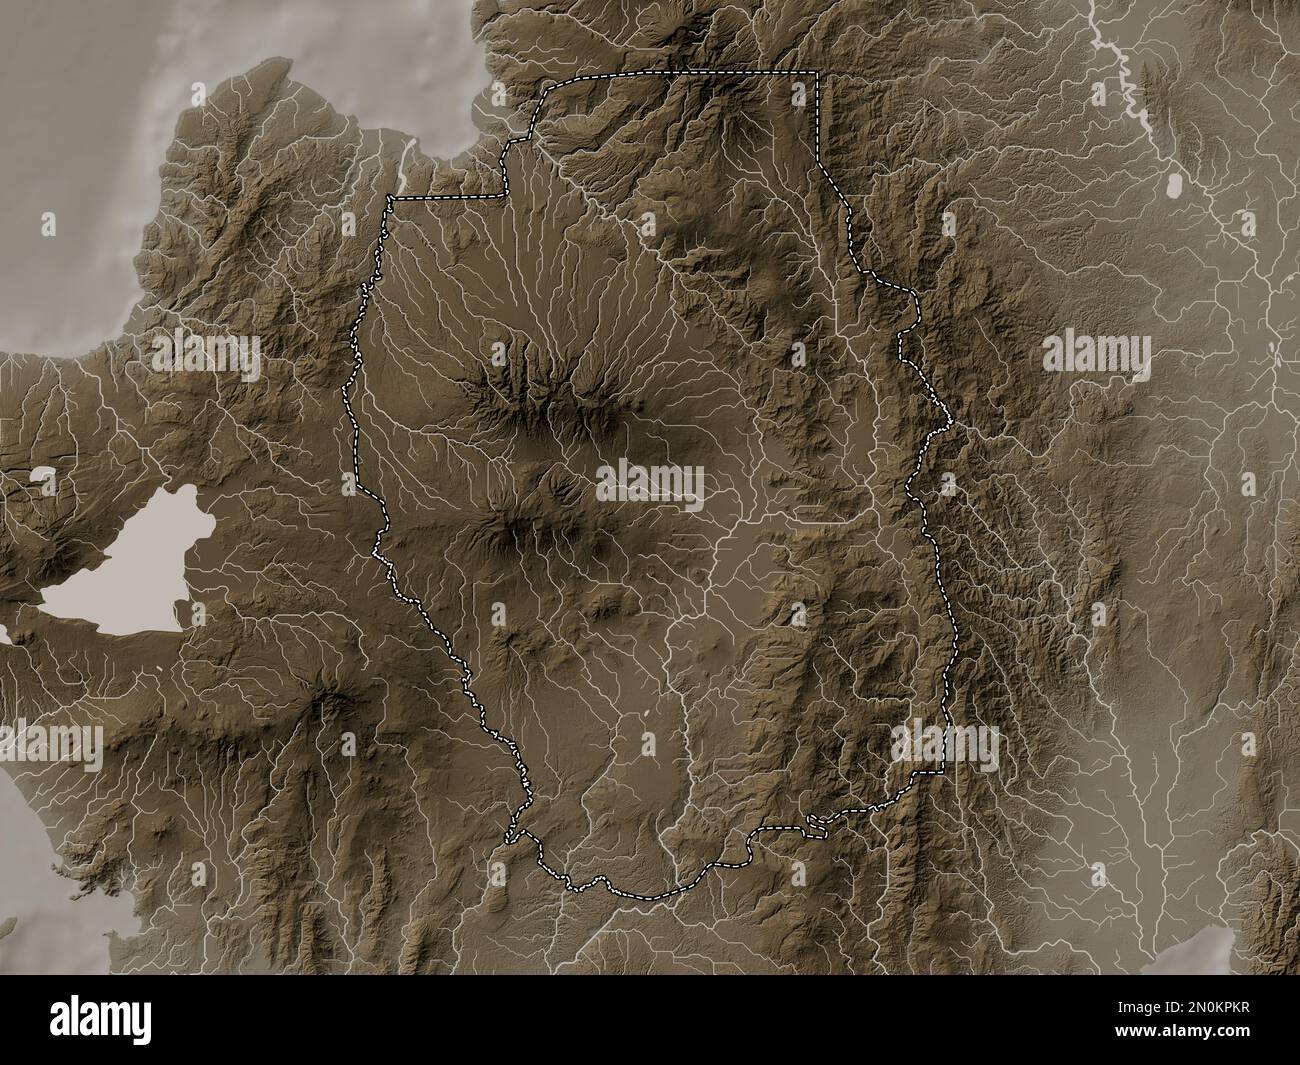 Bukidnon, province of Philippines. Elevation map colored in sepia tones with lakes and rivers Stock Photo